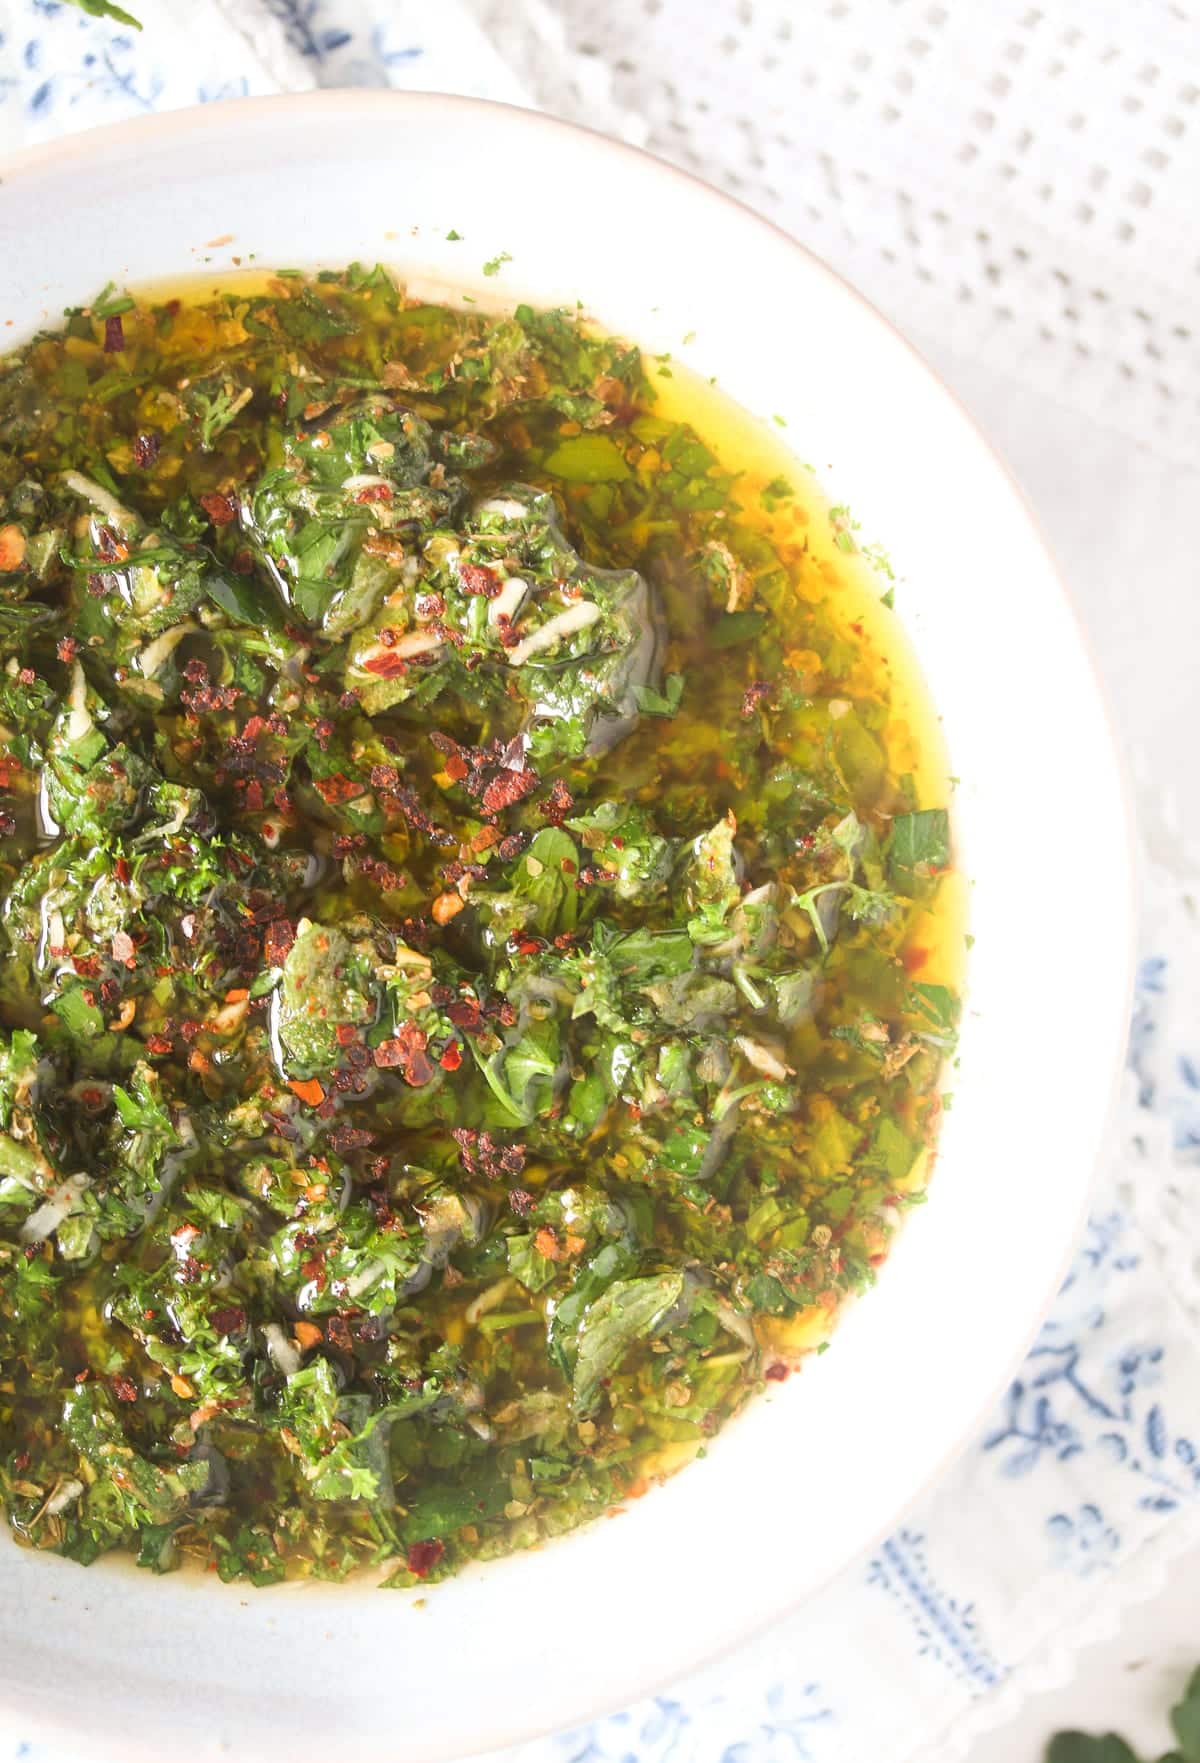 close up bowl of chimichurri sauce made with mint, parsley, chili and garlic.